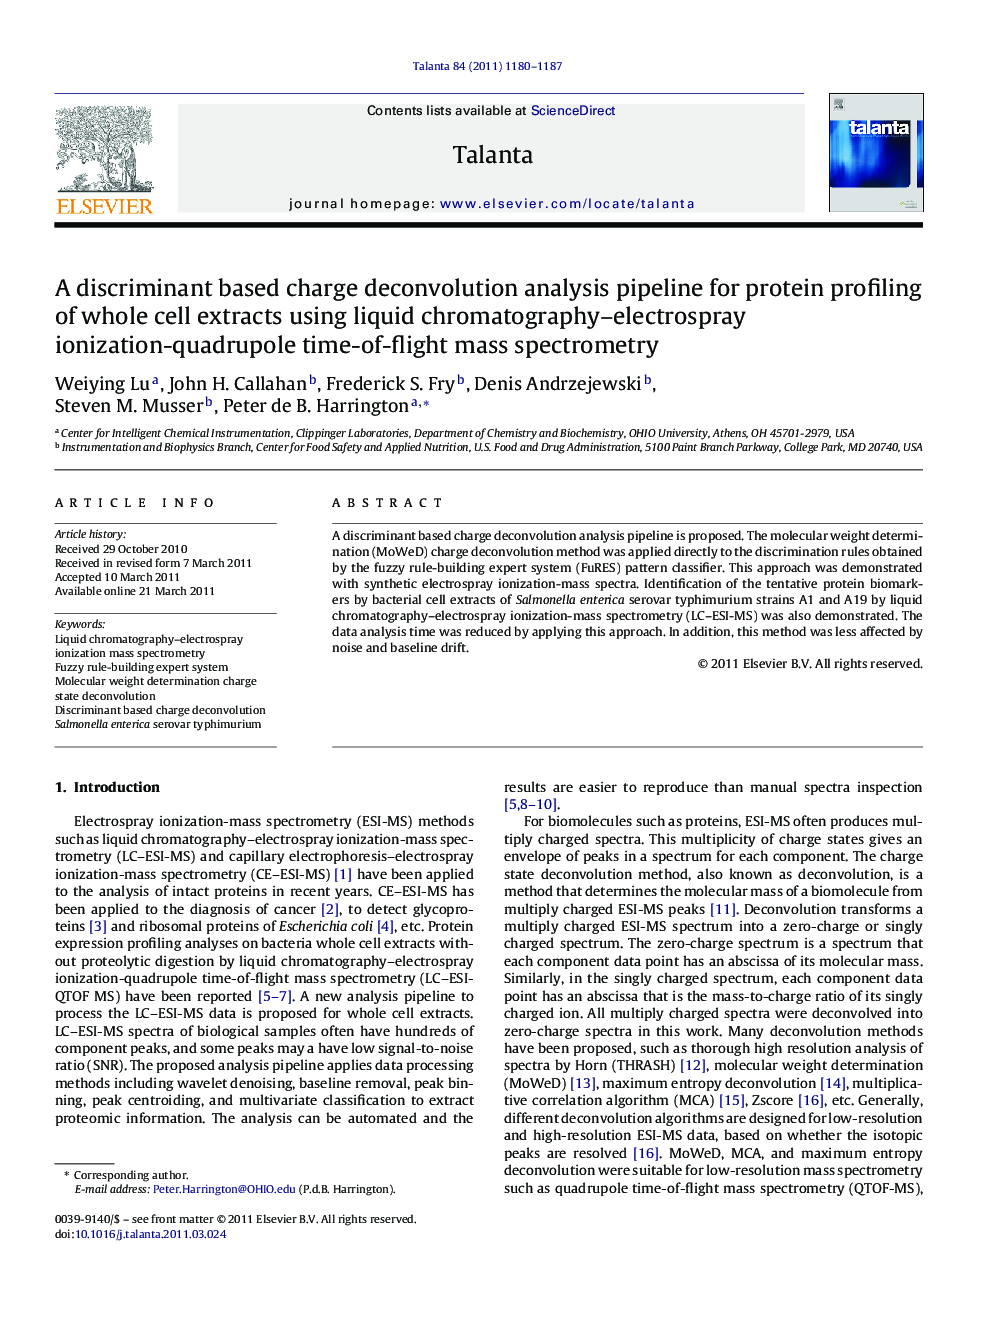 A discriminant based charge deconvolution analysis pipeline for protein profiling of whole cell extracts using liquid chromatography-electrospray ionization-quadrupole time-of-flight mass spectrometry